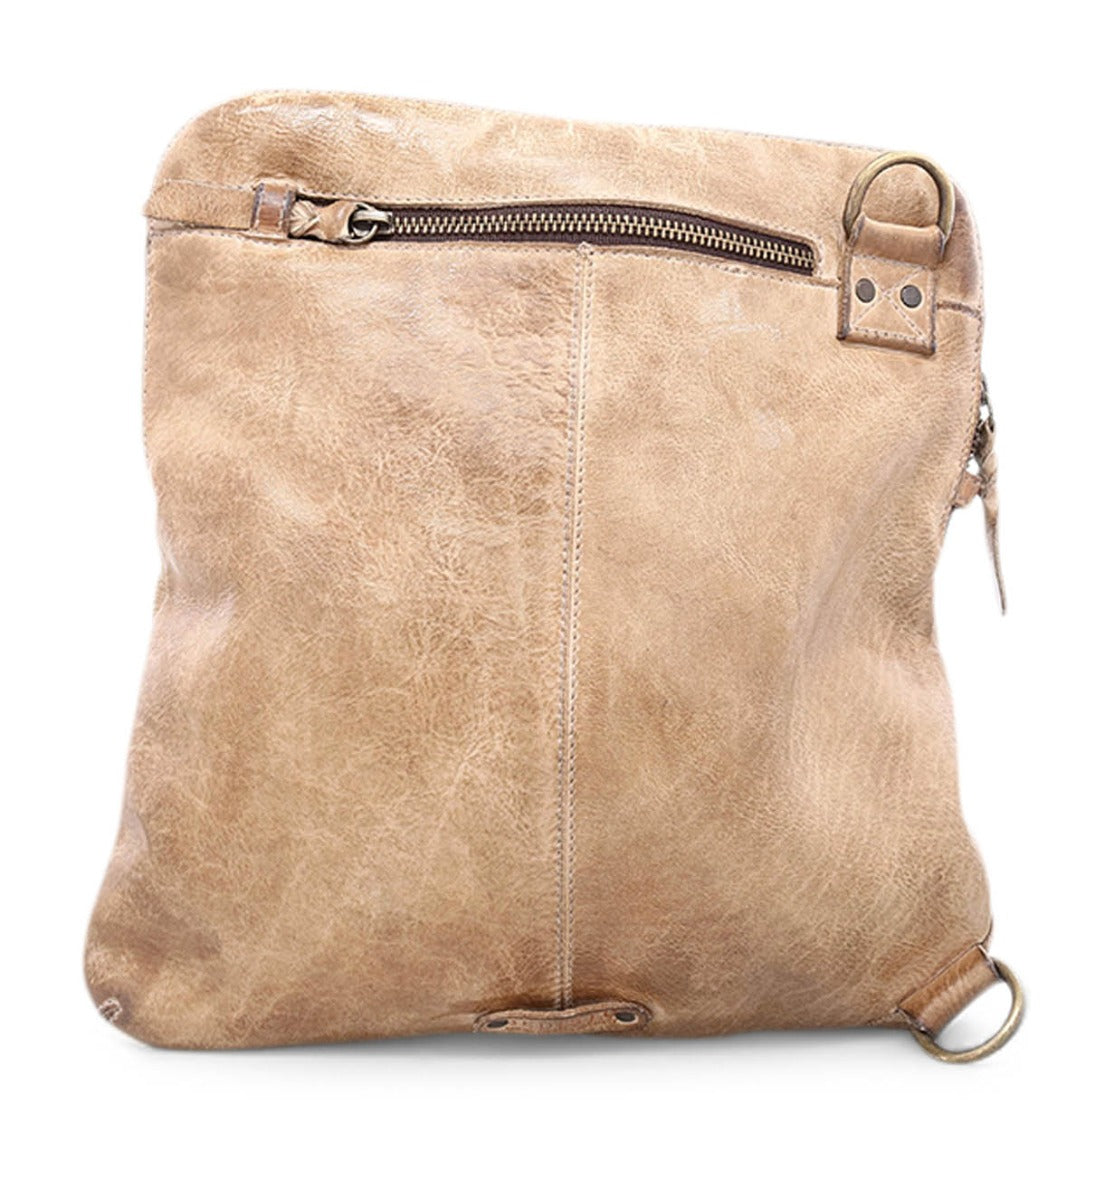 A Aiken leather crossbody bag by Bed Stu on a white background.